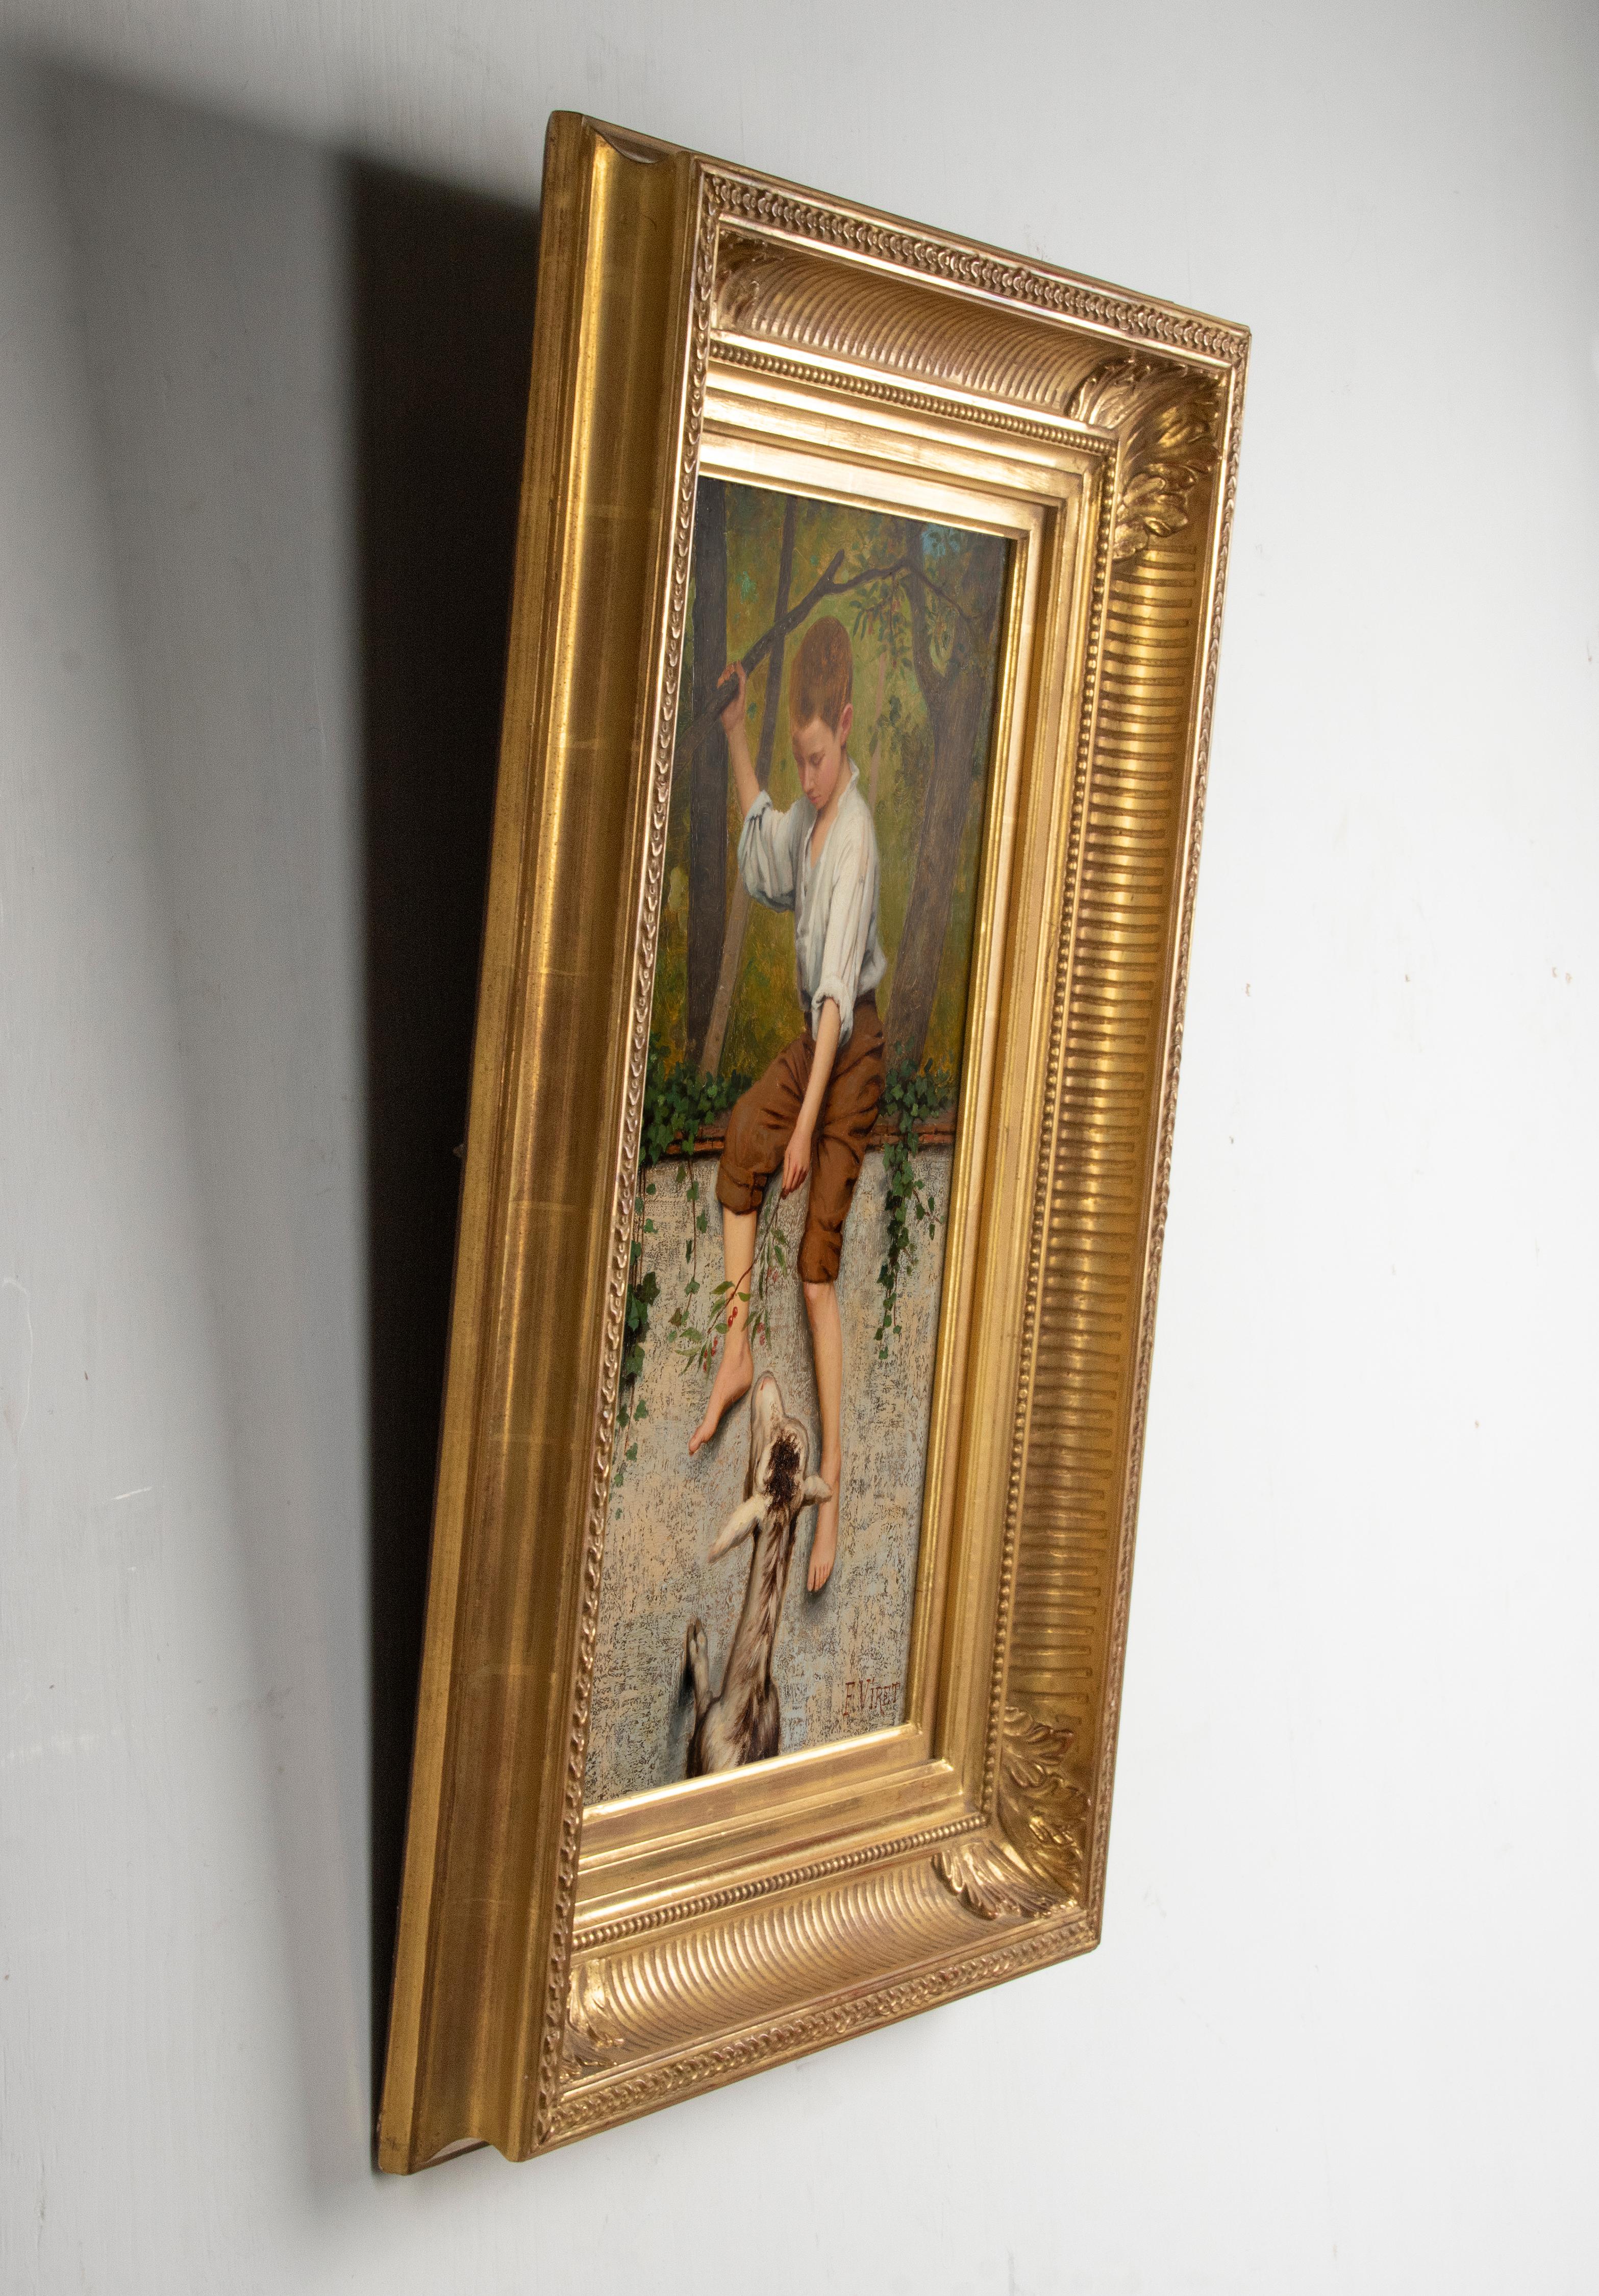 Hand-Painted Late 19th Century Oil Painting Young Boy with a Goat by Frédéric Viret For Sale